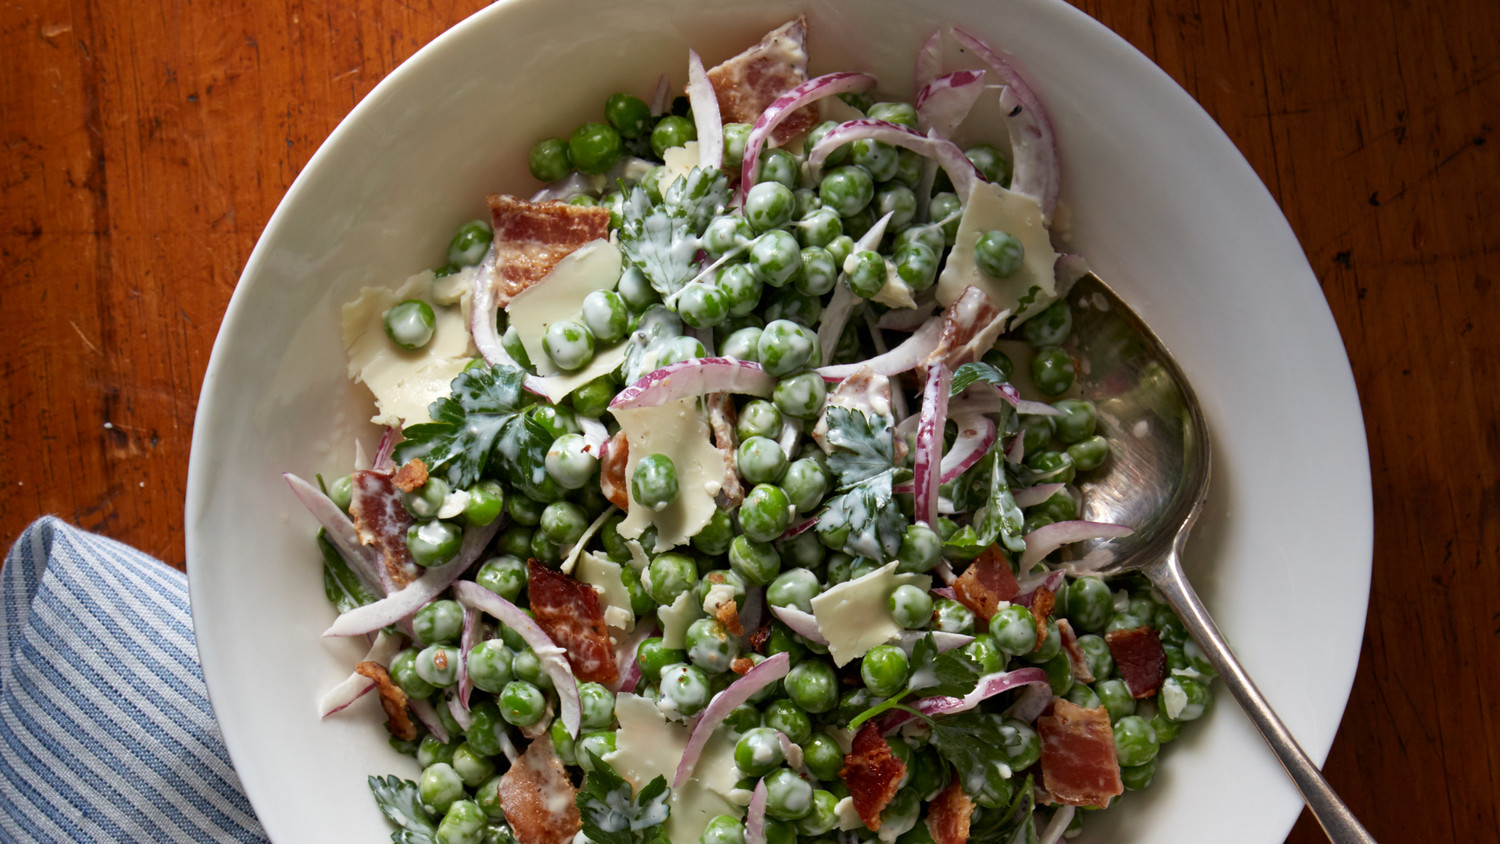 What are some good Rachael Ray pea salad recipes?